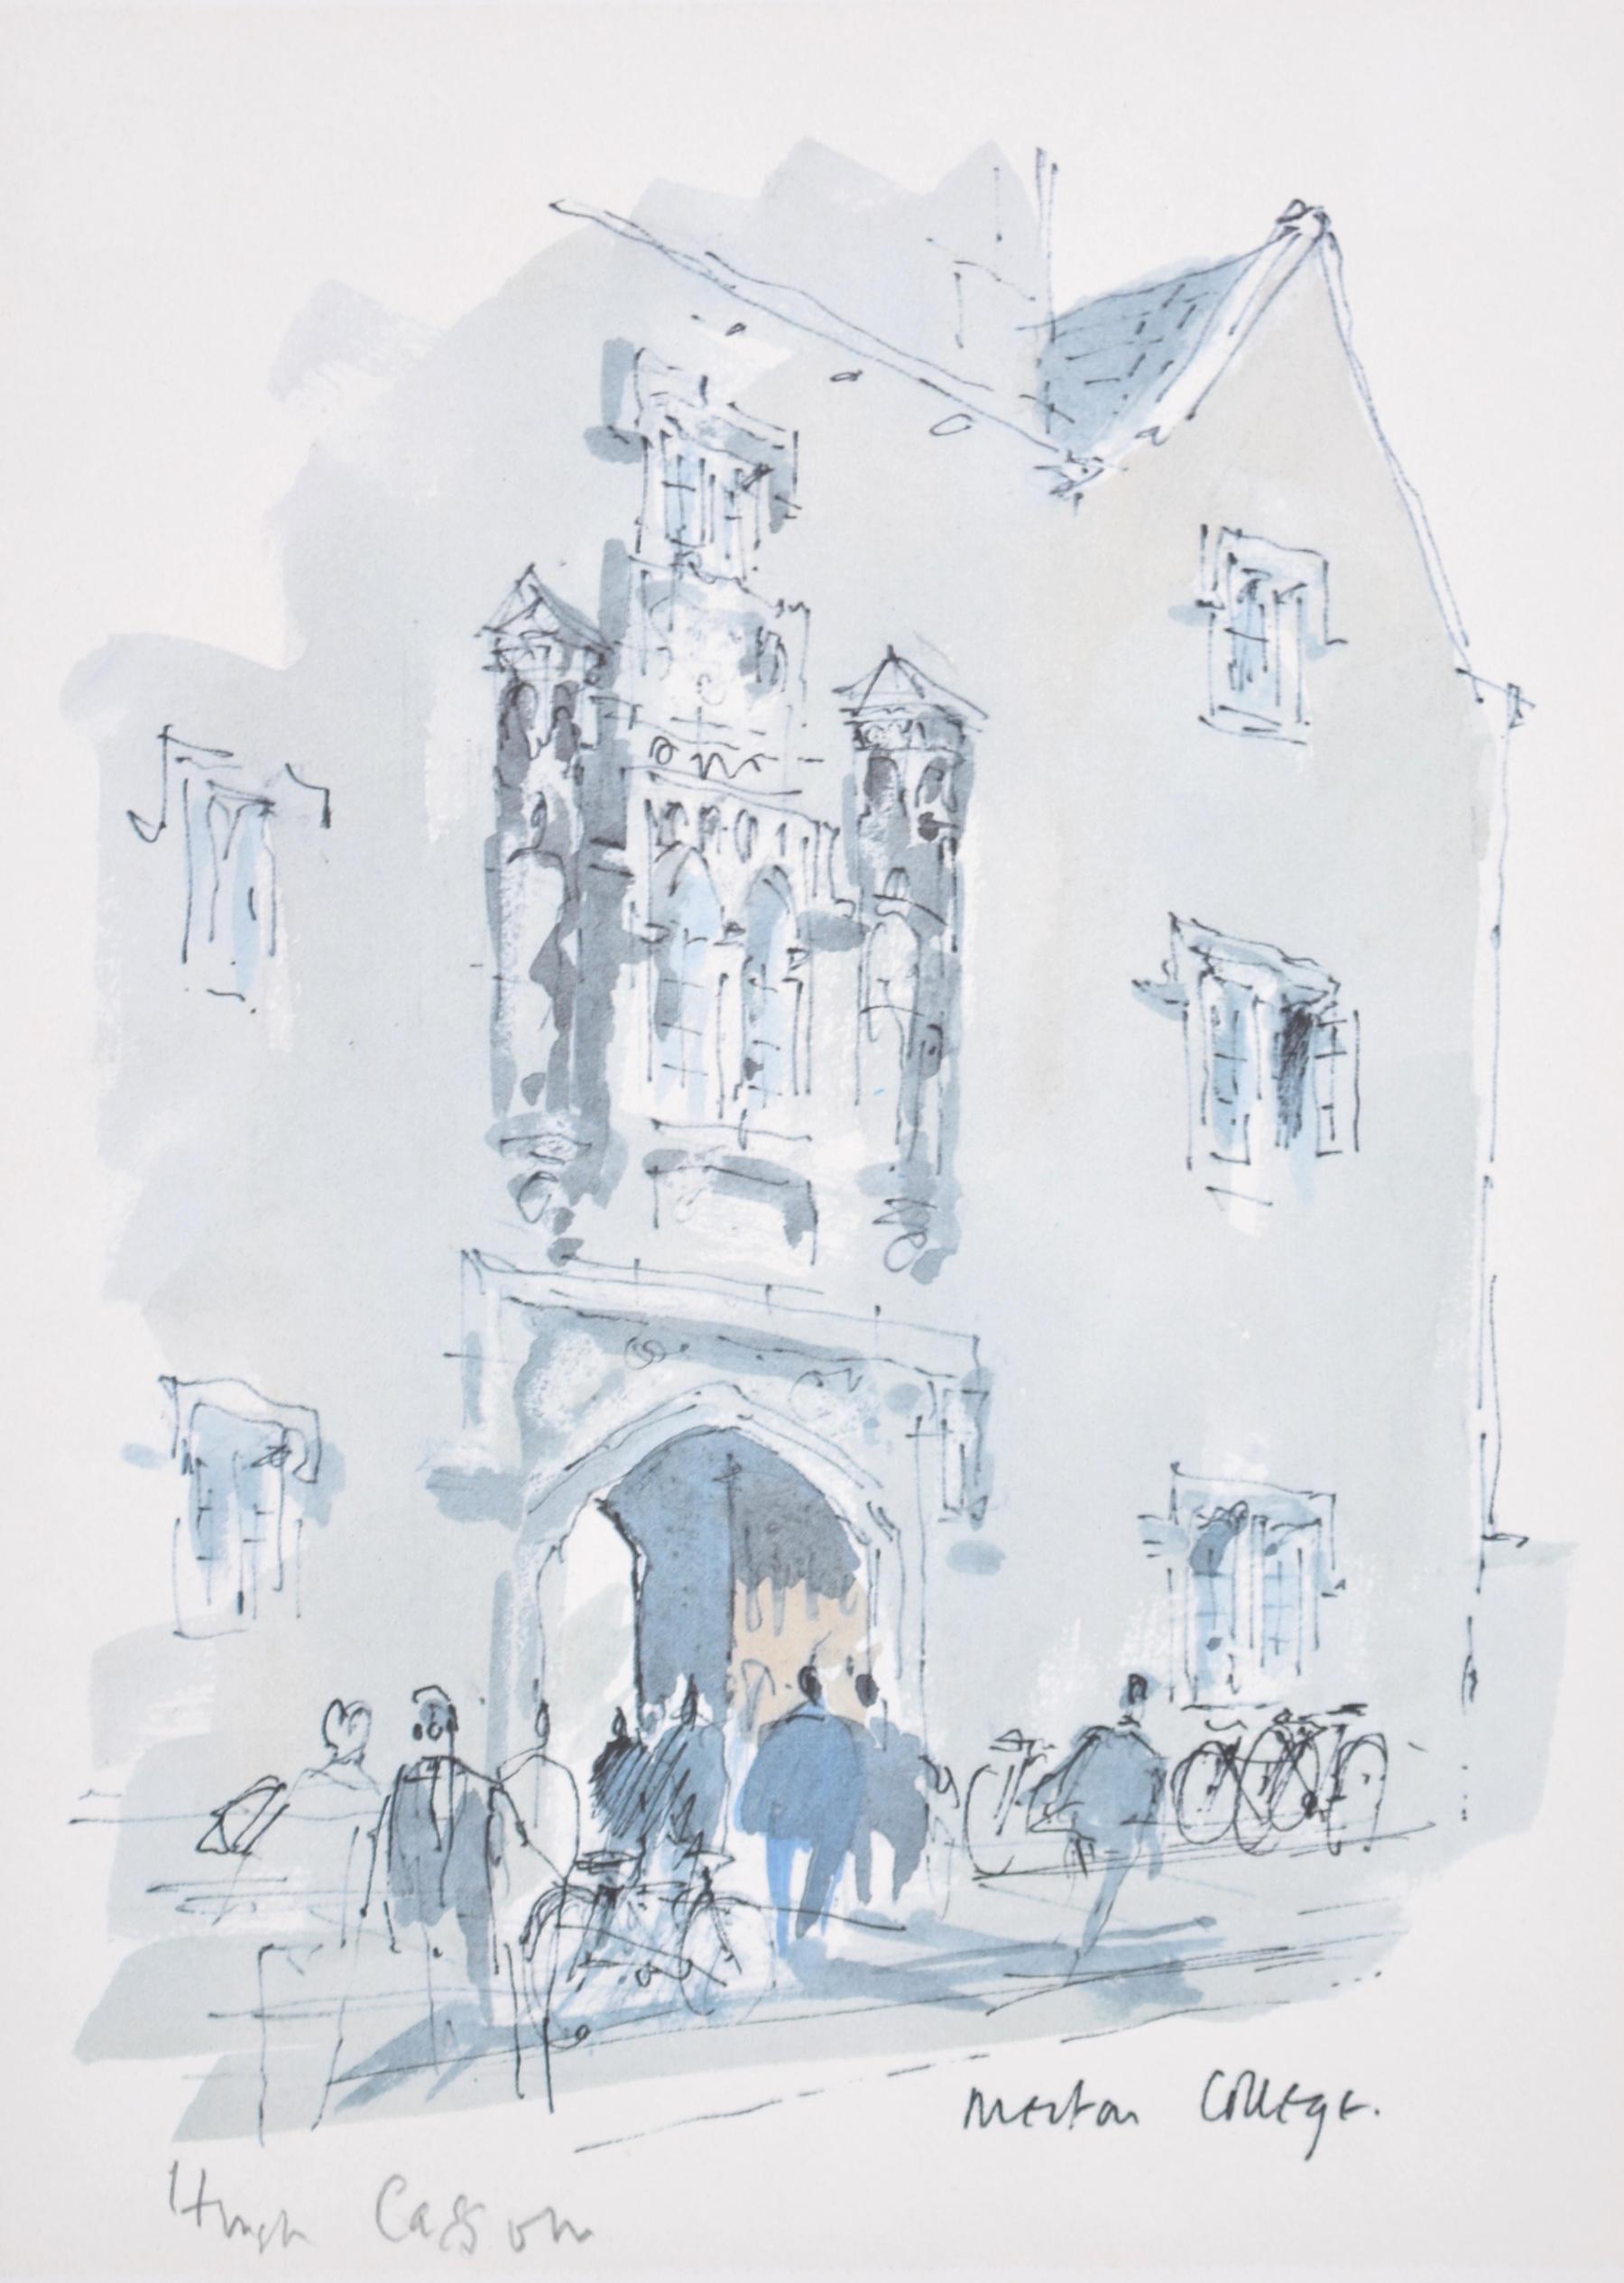 To see our other views of Oxford and Cambridge, scroll down to "More from this Seller" and below it click on "See all from this seller" - or send us a message if you cannot find the view you want.

Hugh Casson (1910 - 1999)
Merton College,